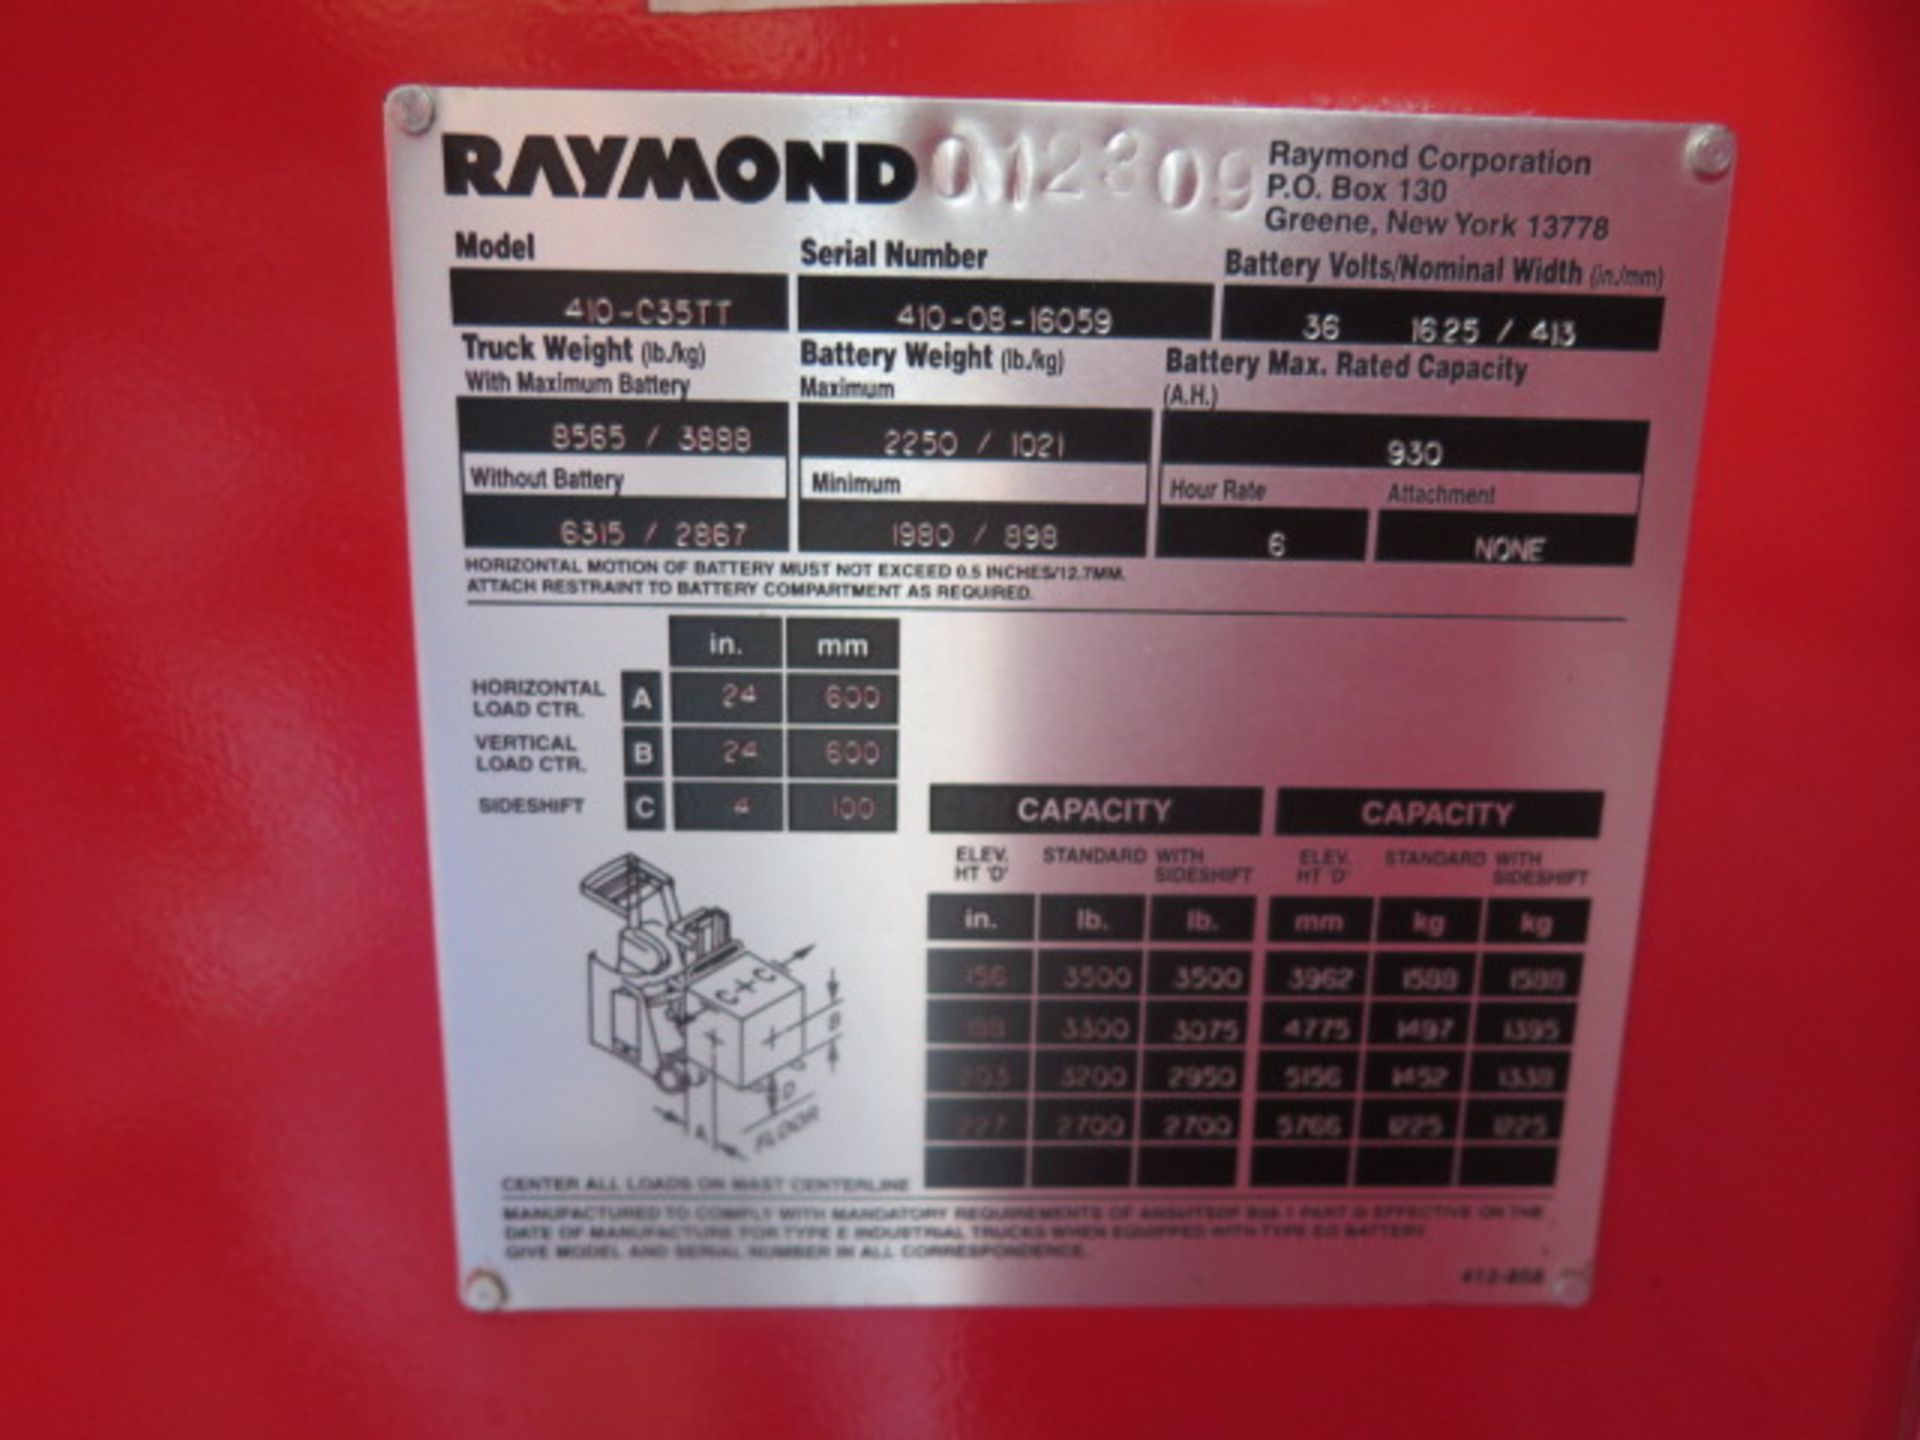 Raymond 410-C35TT 3500 Lb Cap Short Mast Stand-In Electric Pallet Mover s/n 410-08-16059, SOLD AS IS - Image 15 of 15